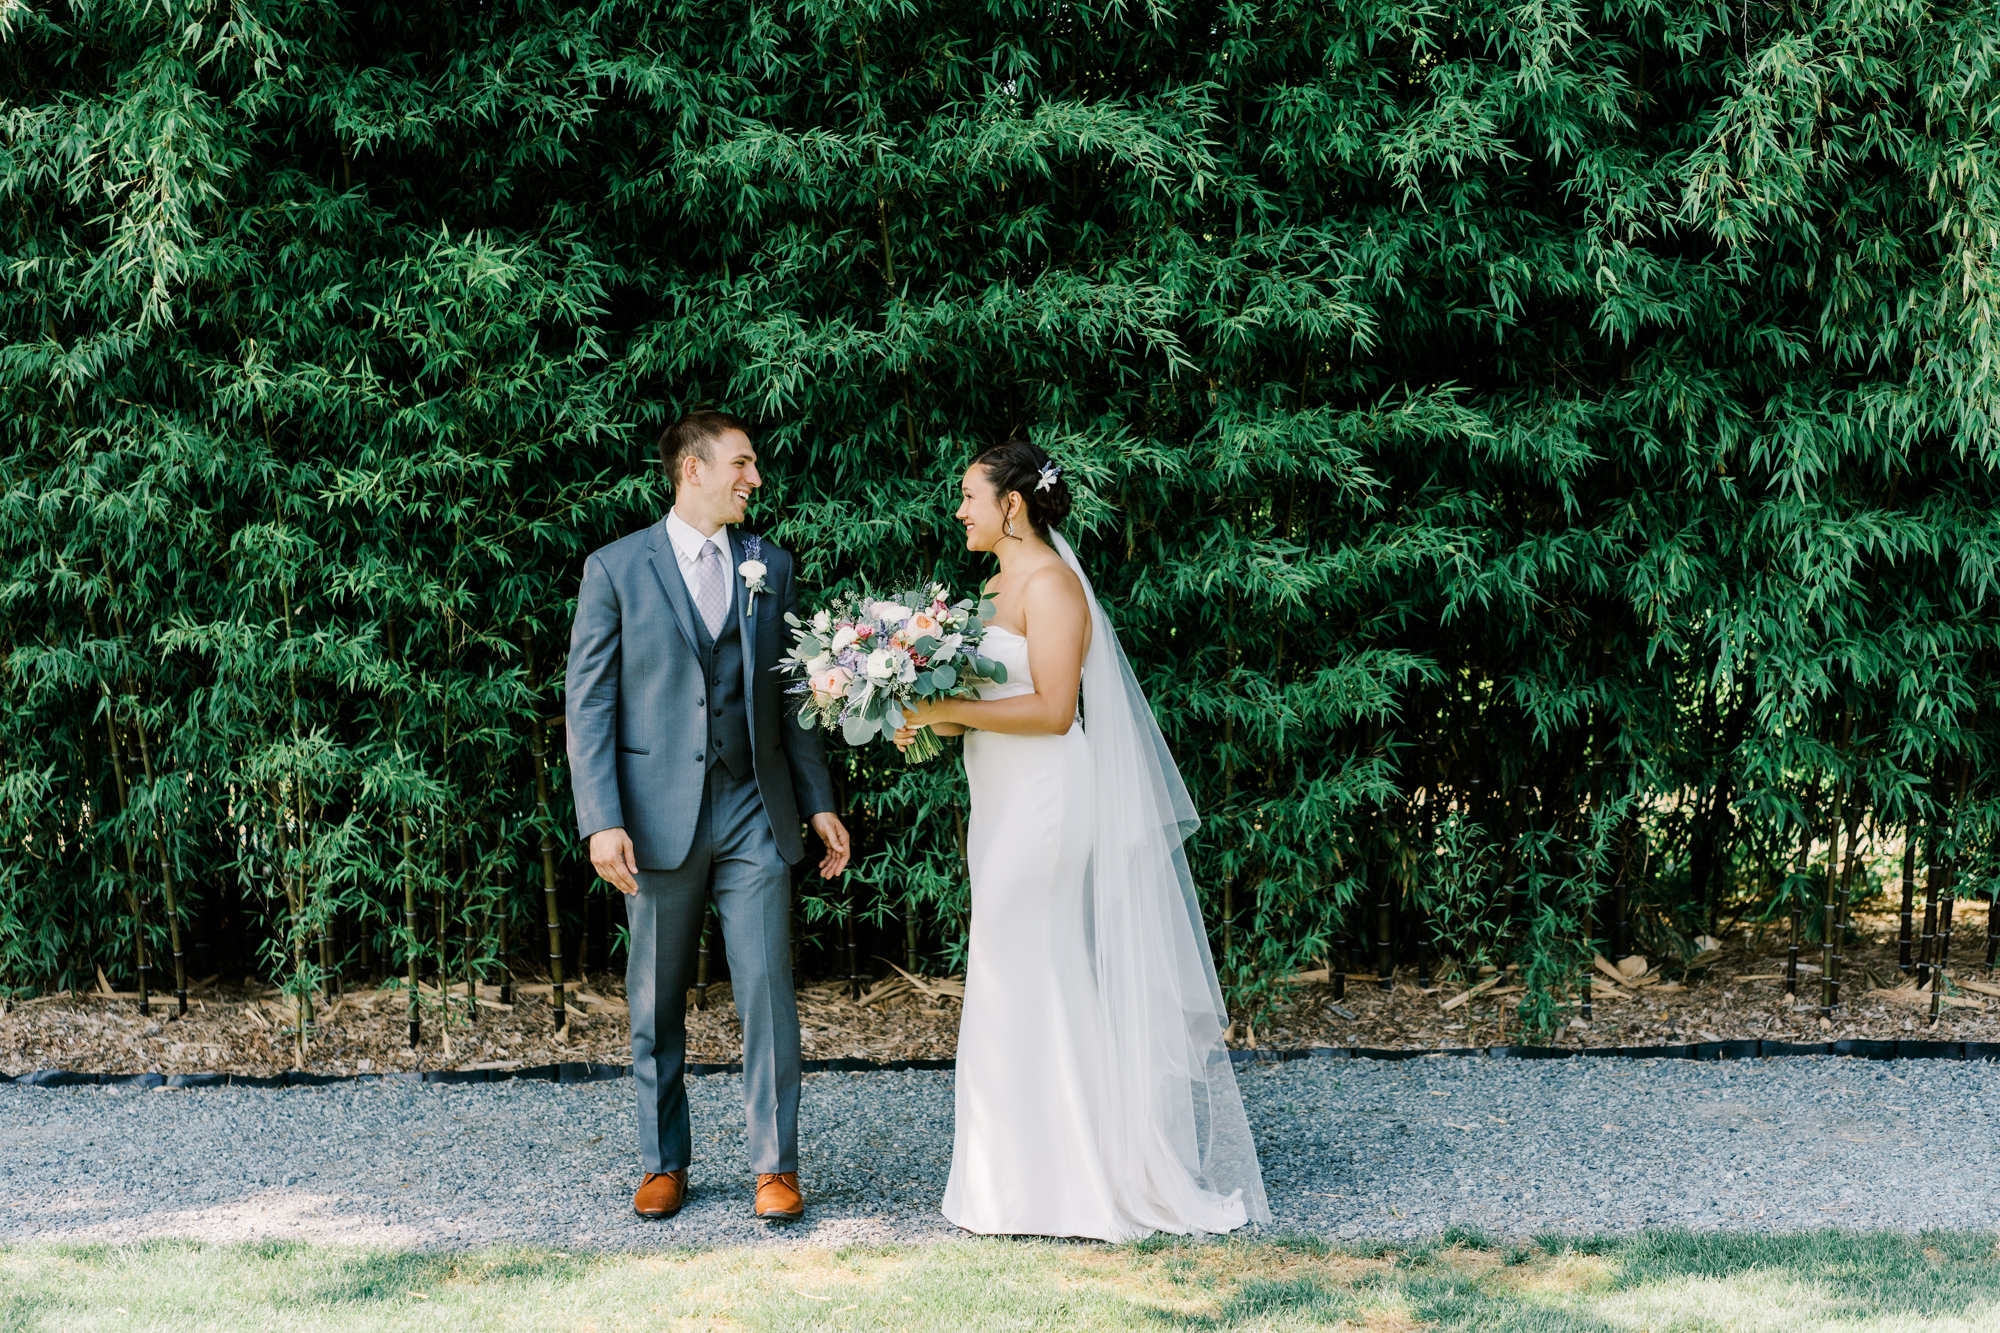 Woodinville Lavender Farm weddings: First look 